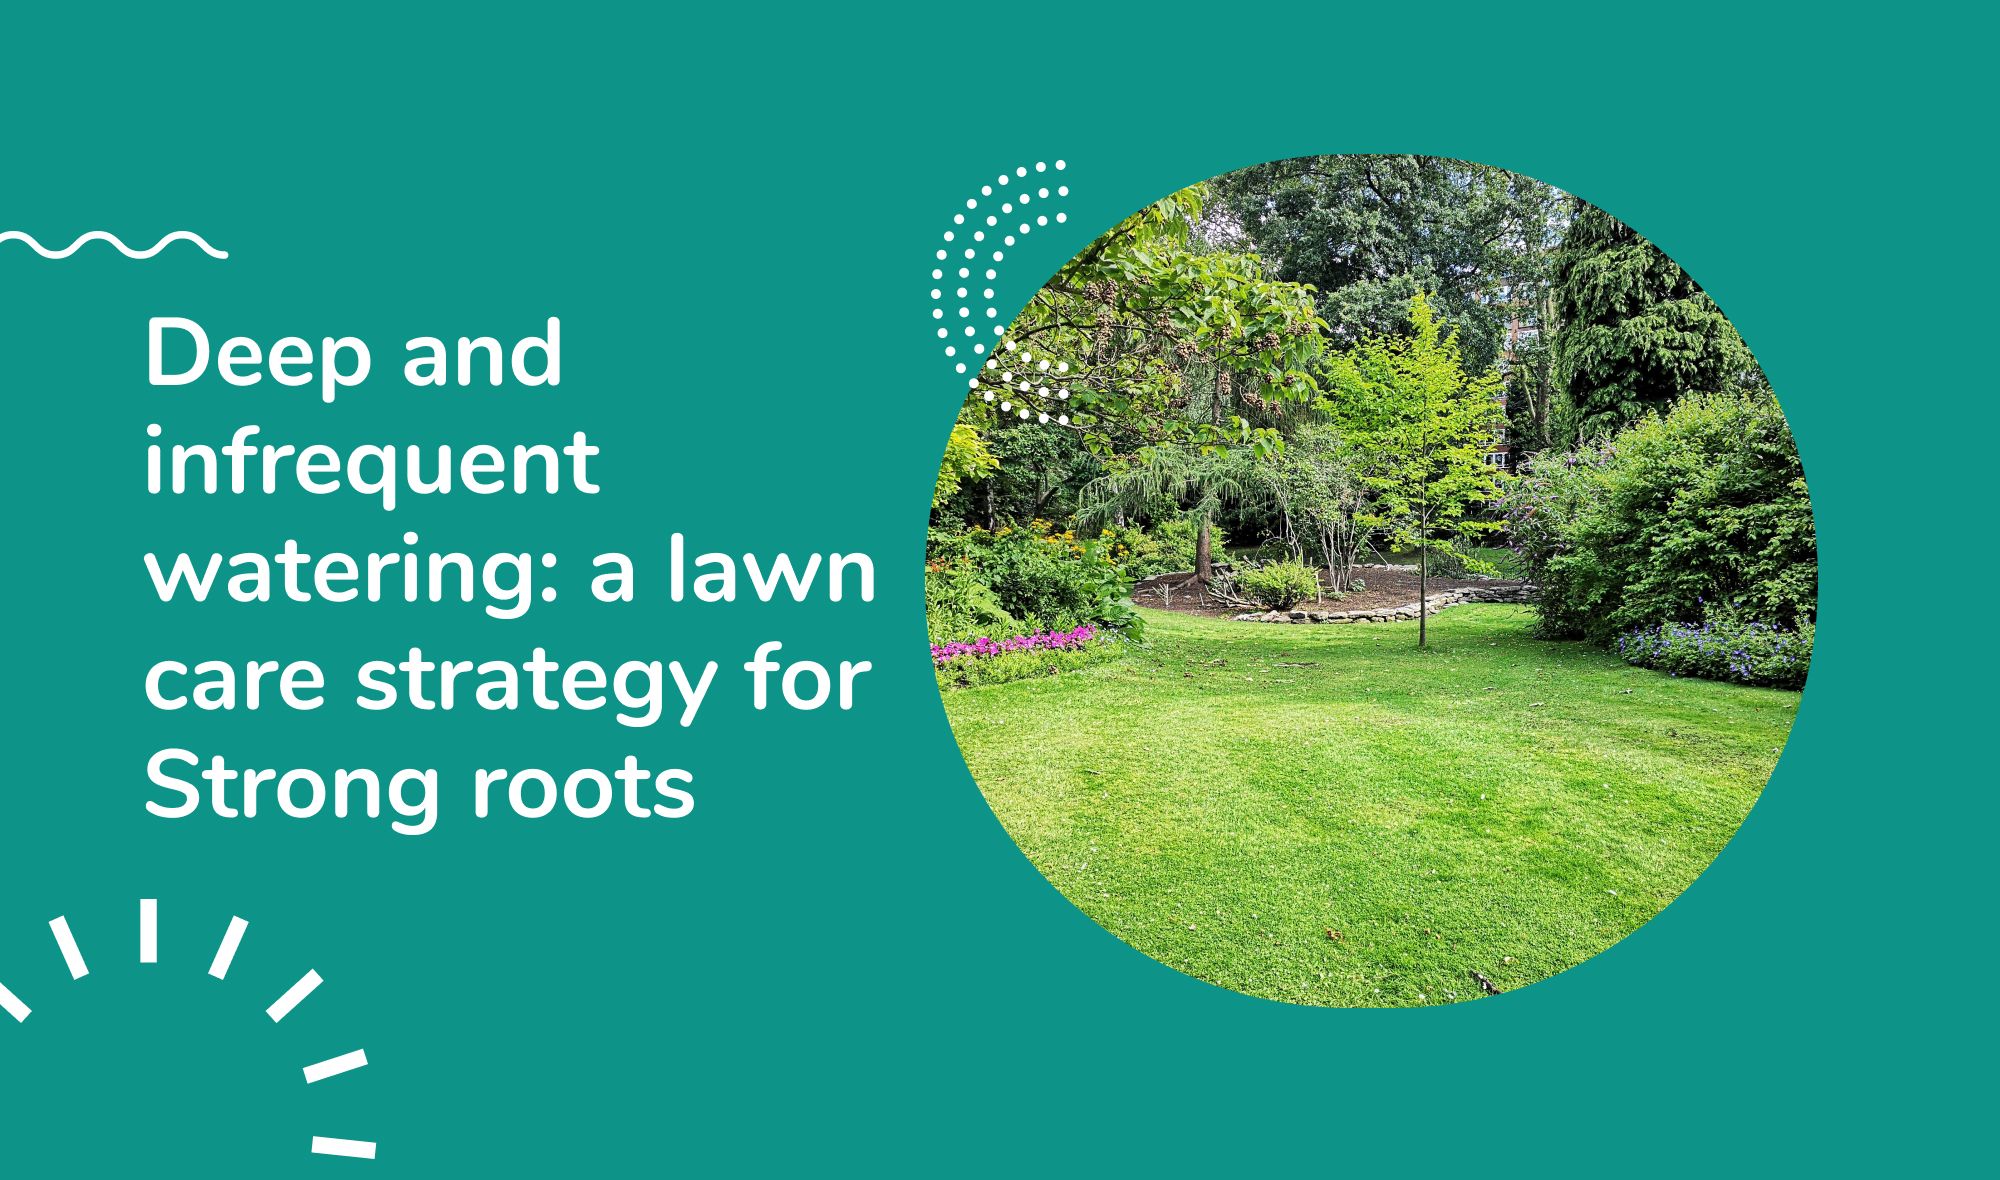 #2 Deep and infrequent watering: a lawn care strategy for Strong roots